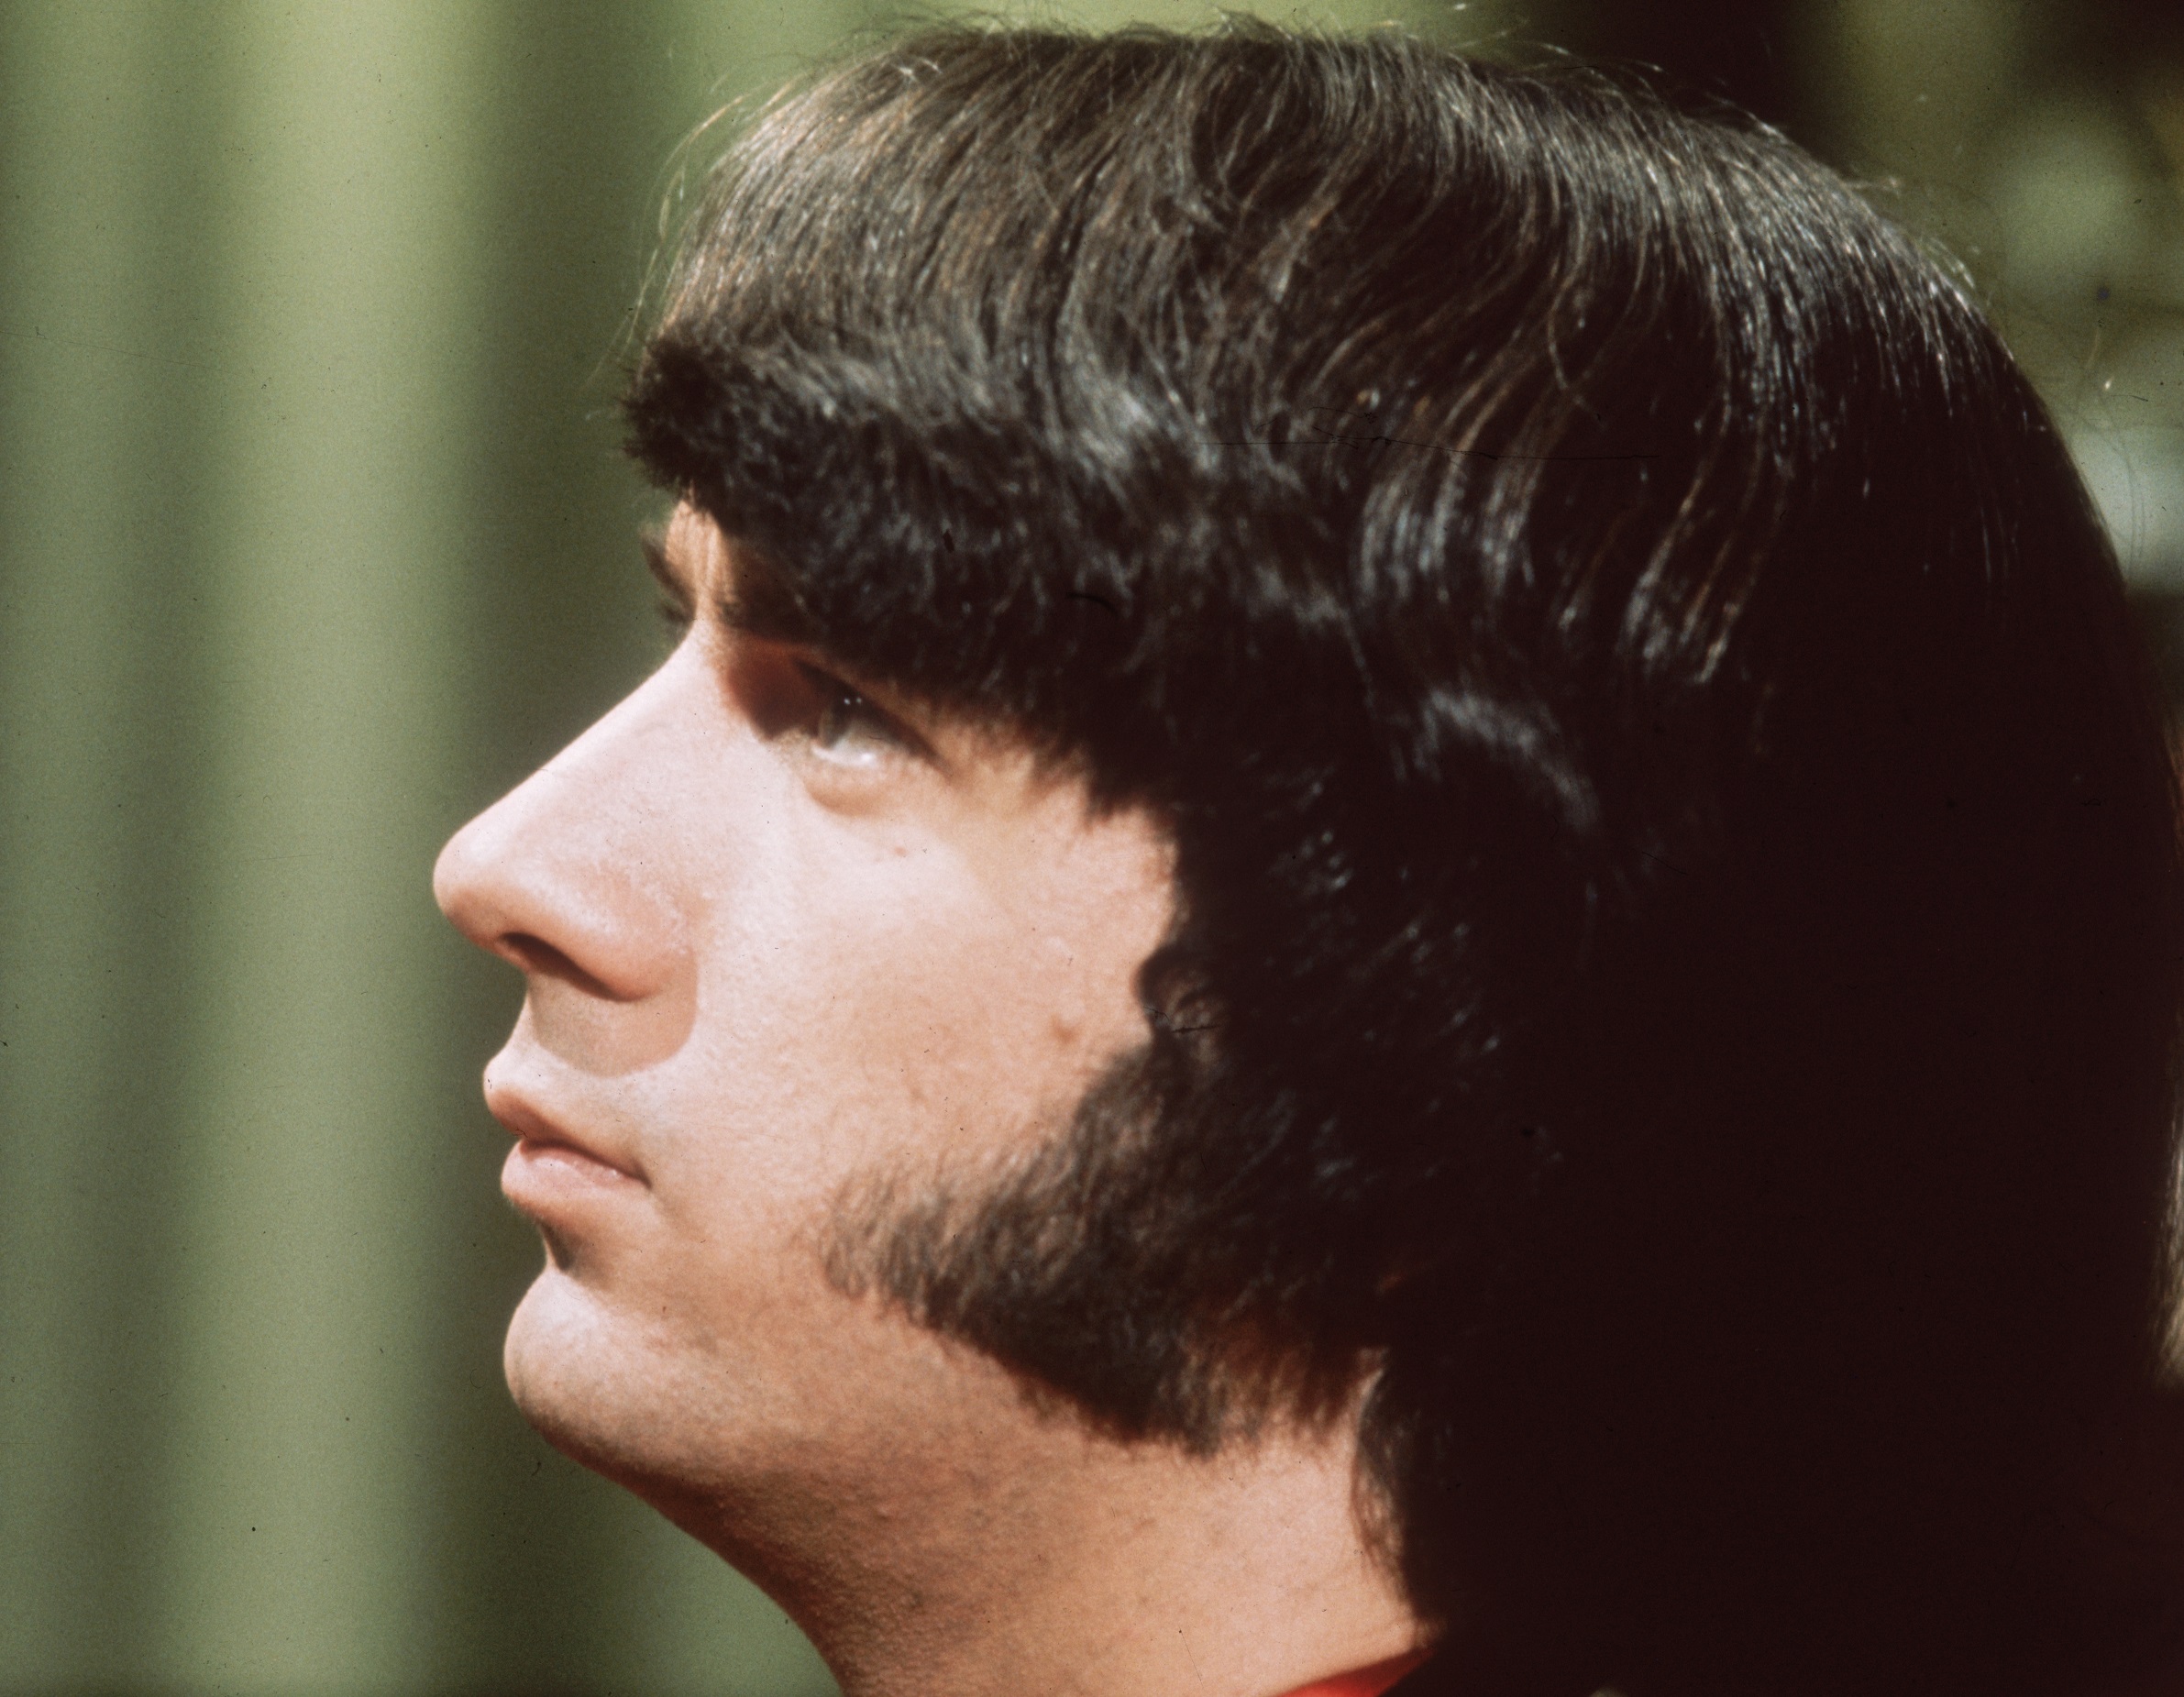 Mike Nesmith without his signature hat